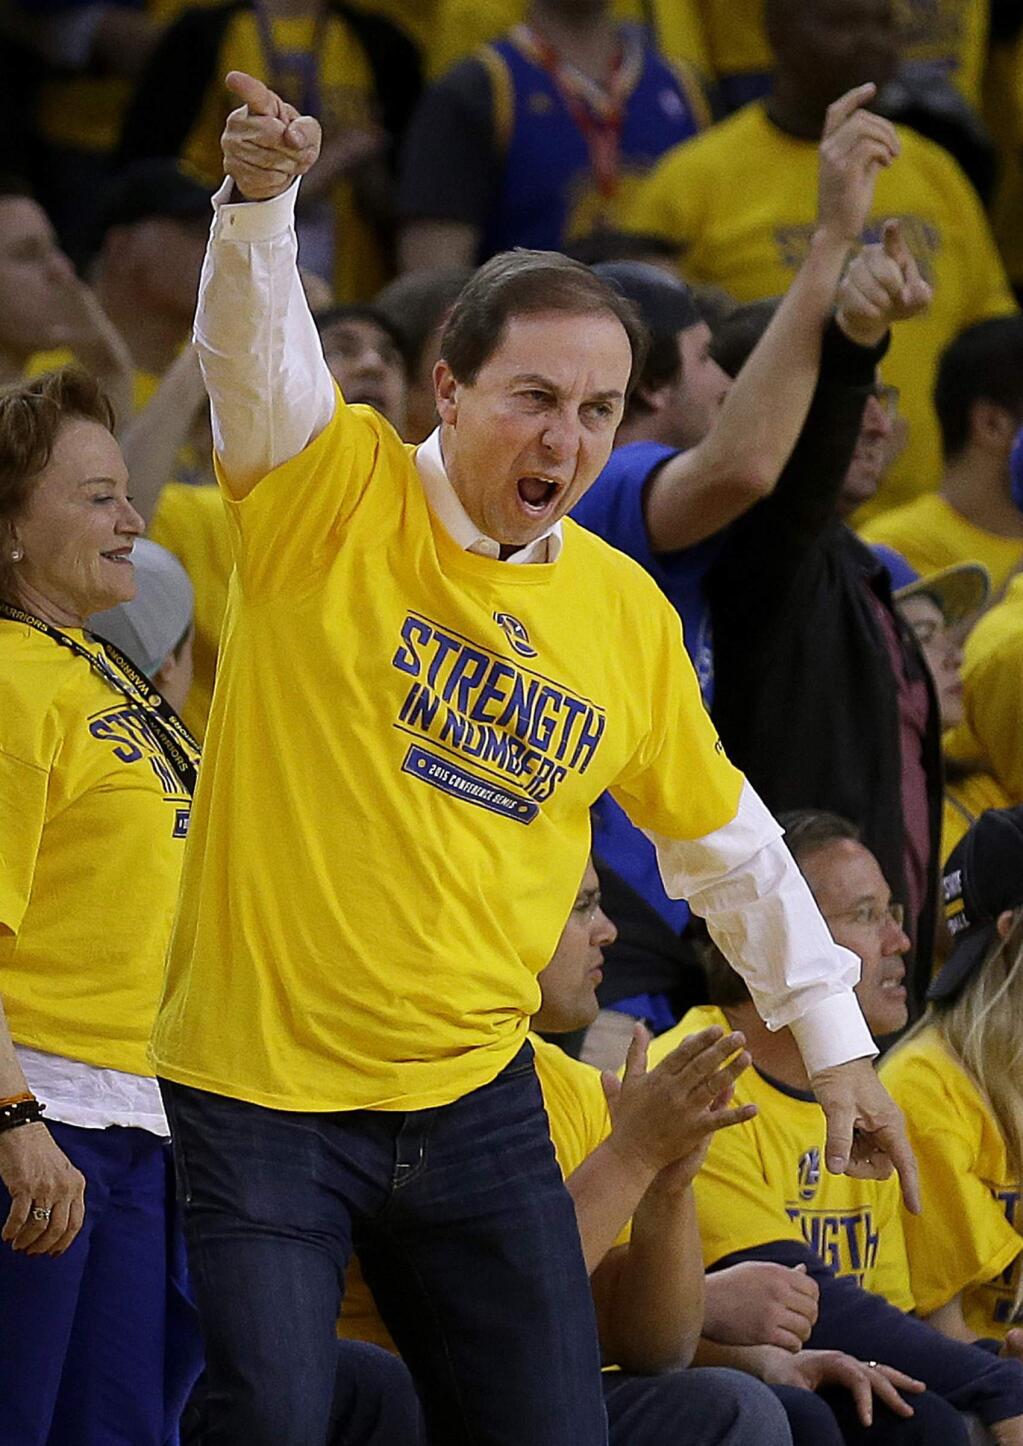 In this May 5, 2015, file photo, Golden State Warriors owner Joe Lacob reacts during the second half of Game 2 in a second-round playoff series between the Warriors and the Memphis Grizzlies in Oakland. Lacob can't help but feel a little vindicated now that the franchise is in the NBA Finals for the first time in 40 years. From getting booed by fans after trading Monta Ellis to the questionable decision to fire Mark Jackson as coach, Lacob's moves over the last five years have all led to this: a championship matchup with LeBron James and the Cleveland Cavaliers. (AP Photo/Ben Margot, File)